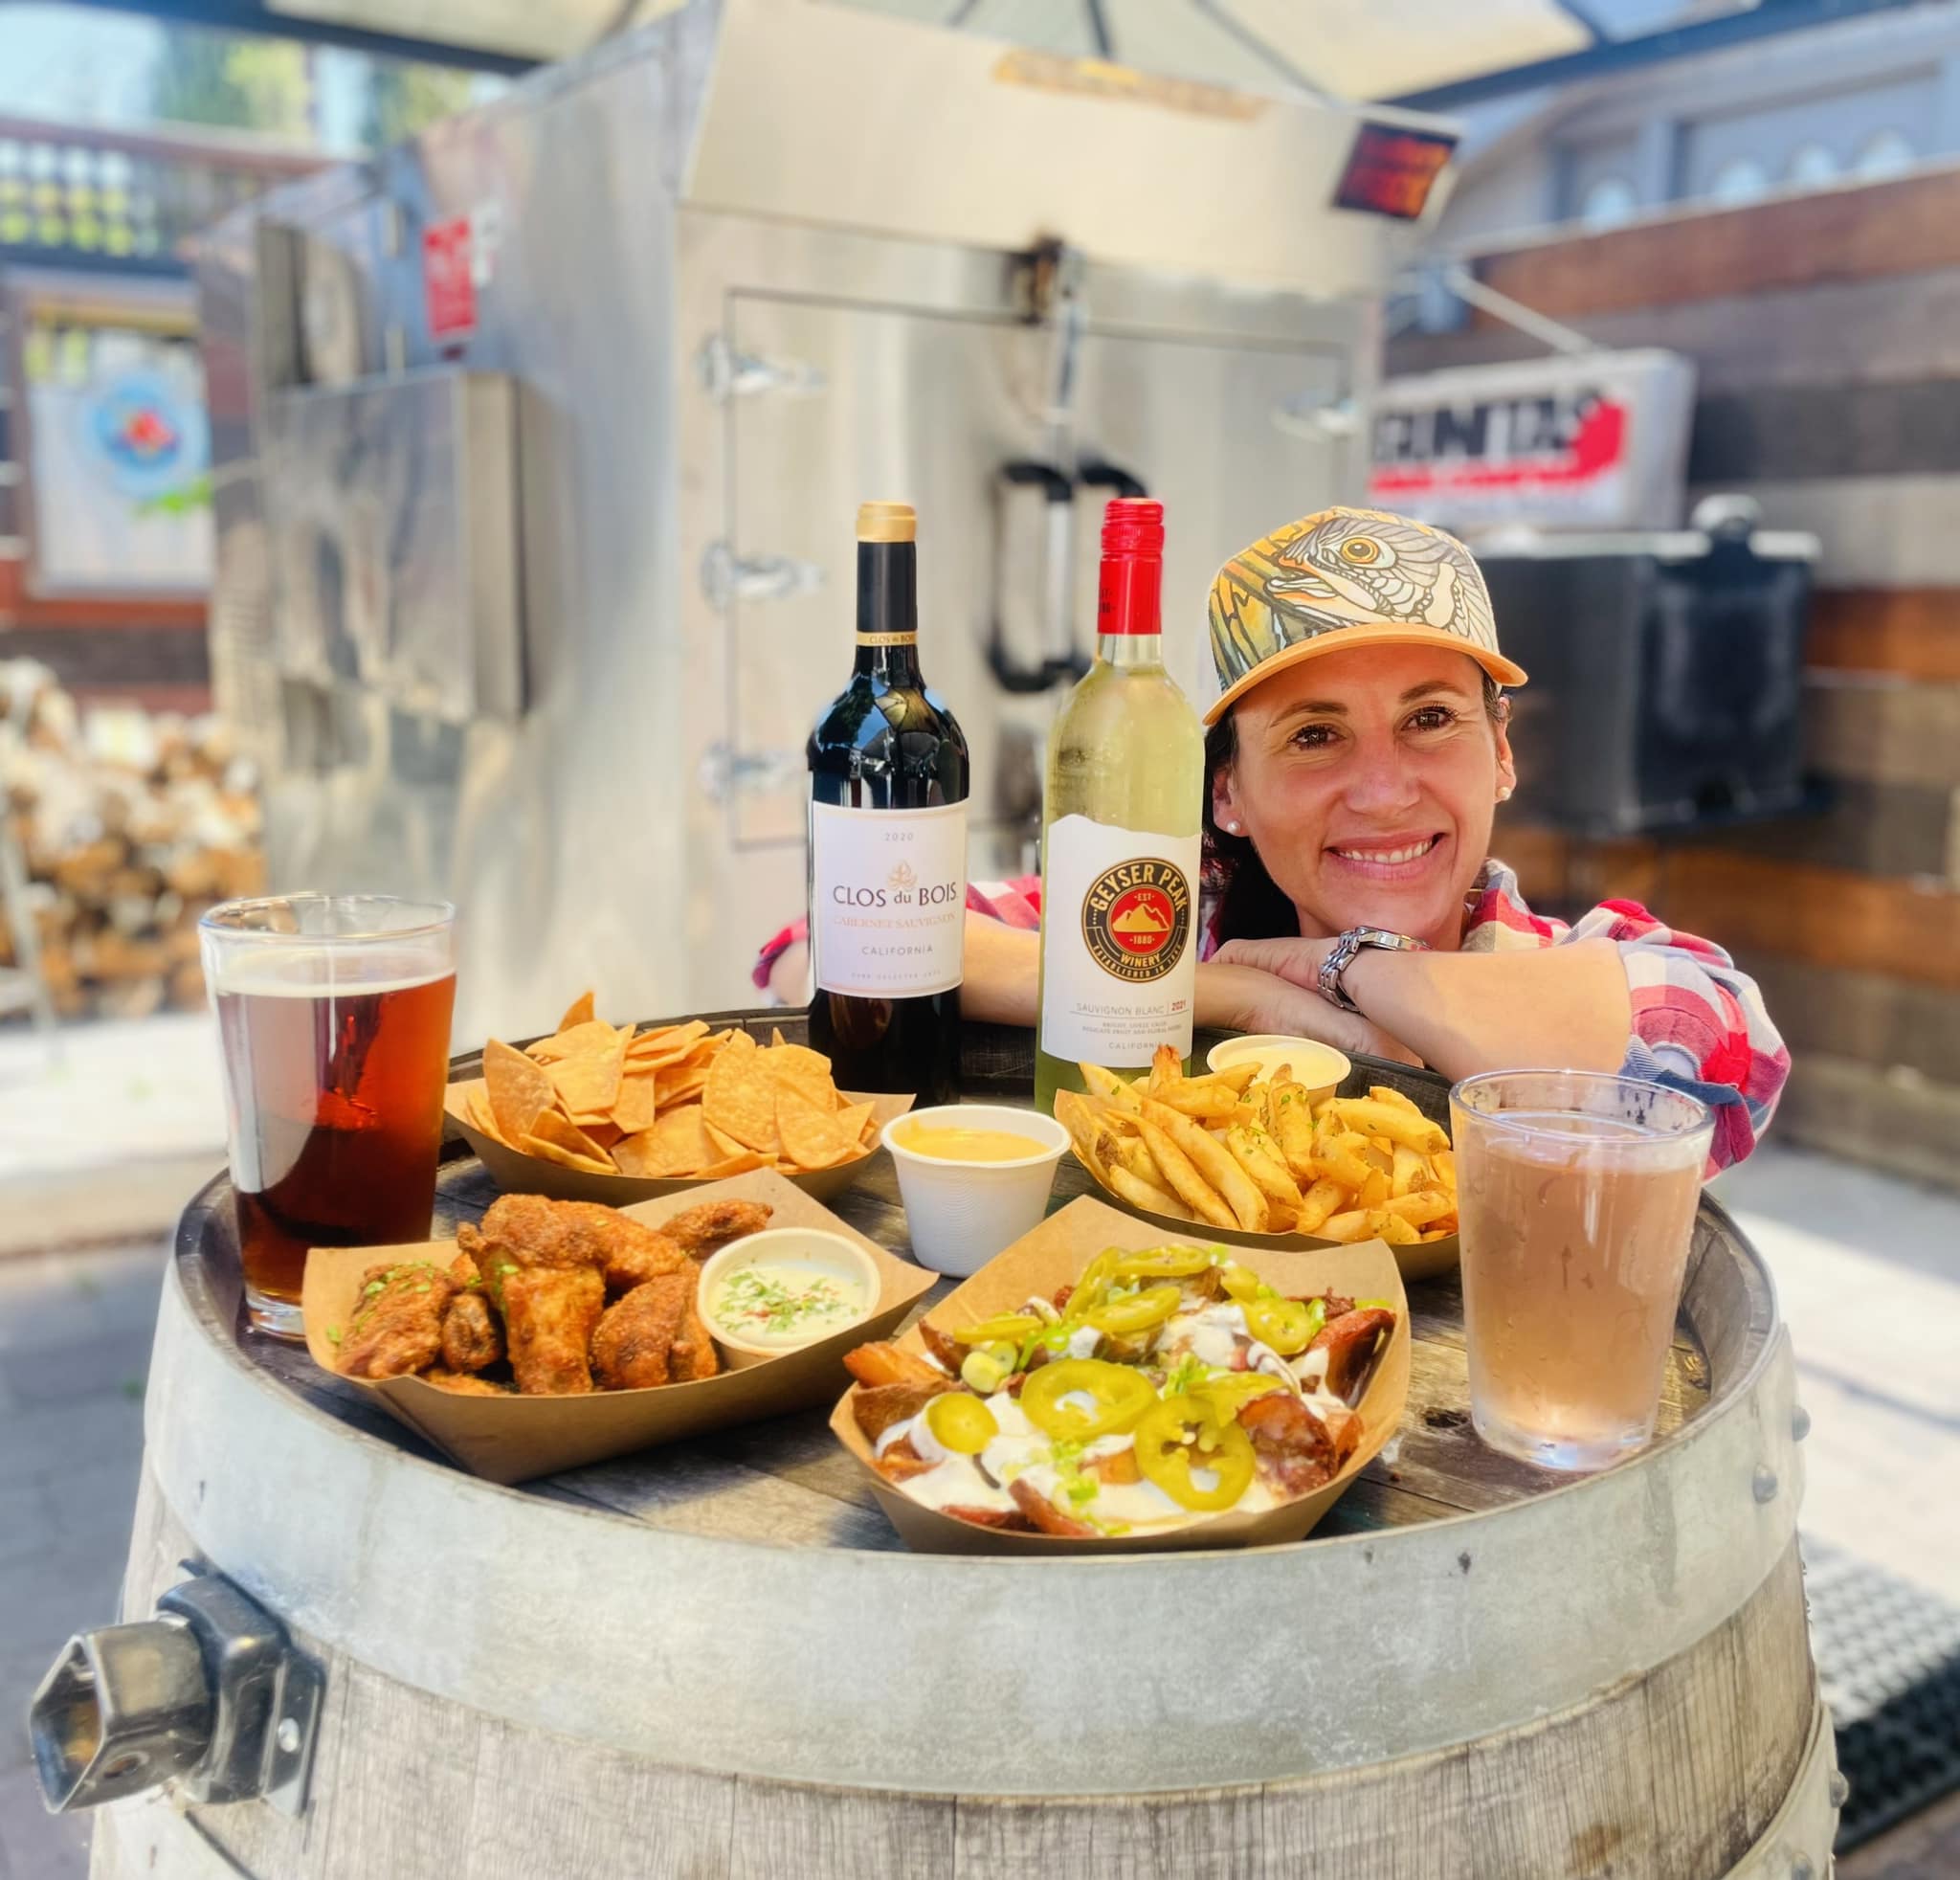 Blazers Smokehouse & Beer Garden in Downtown Novato, California. Owner smiling with an array of their happy hour food offerings, plus beer and wine.